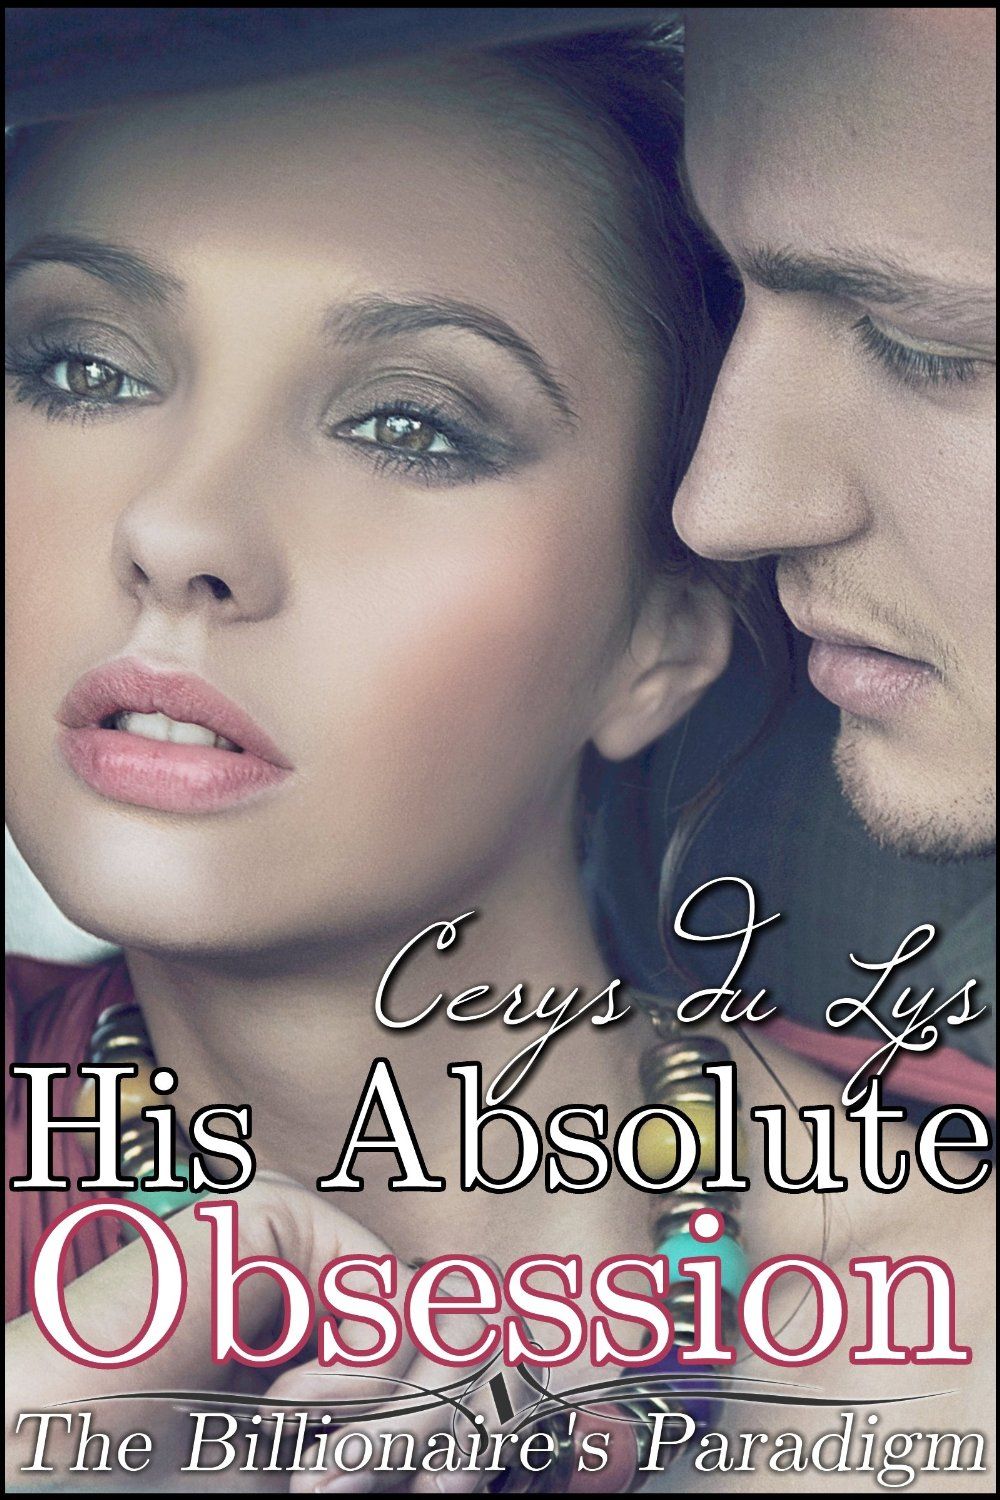 His Absolute Obsession by Cerys du Lys | Ebook, Ebook pdf, Obsession